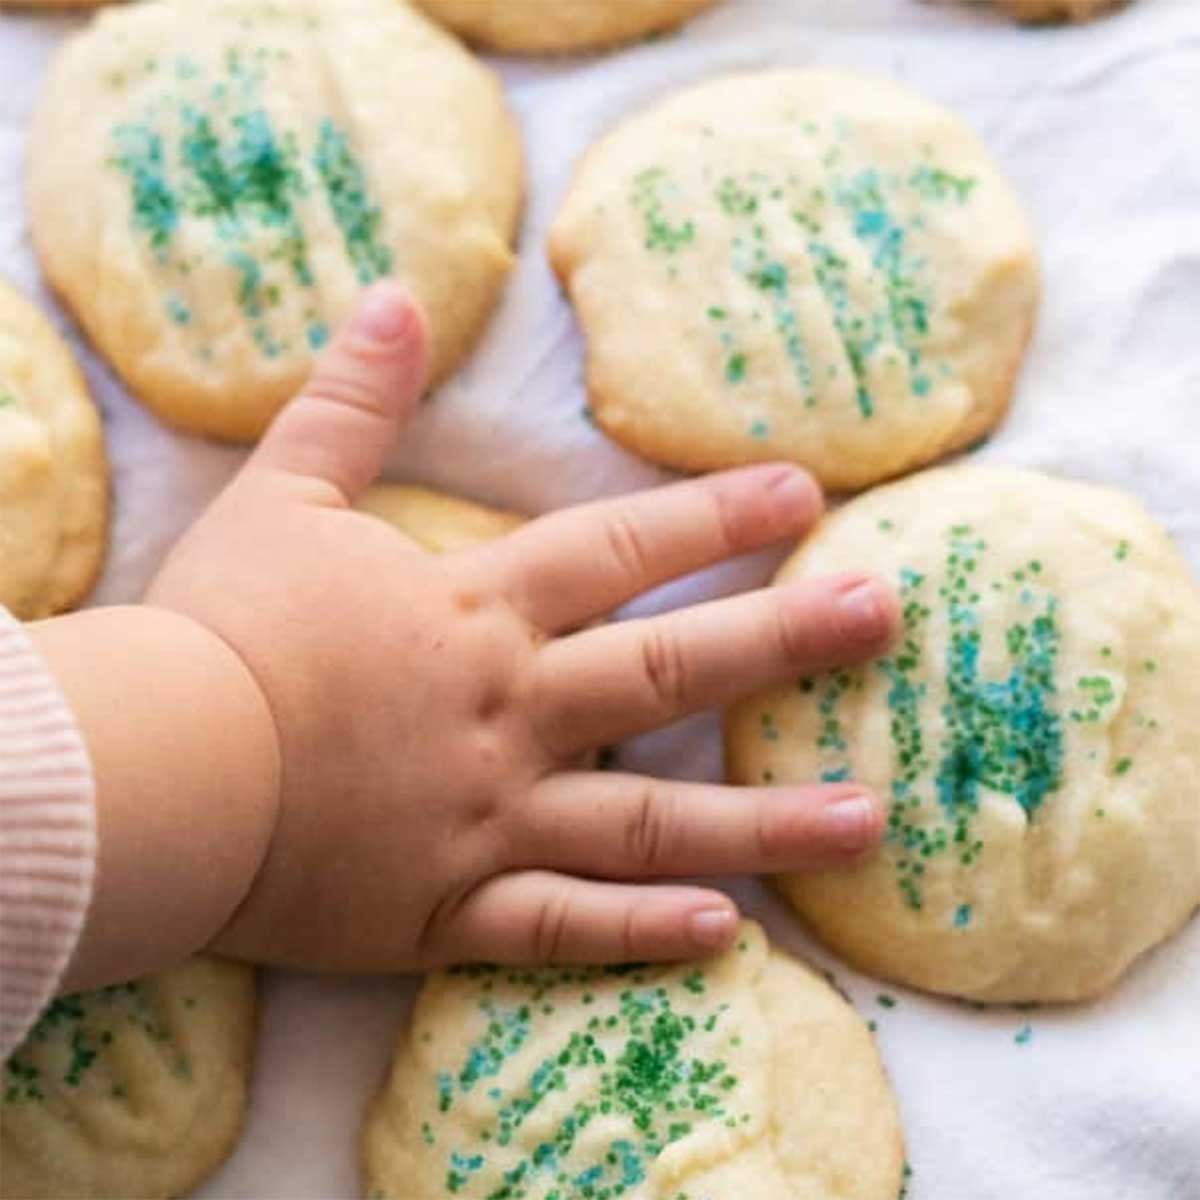 Cookies!, Ages 3-5, Store